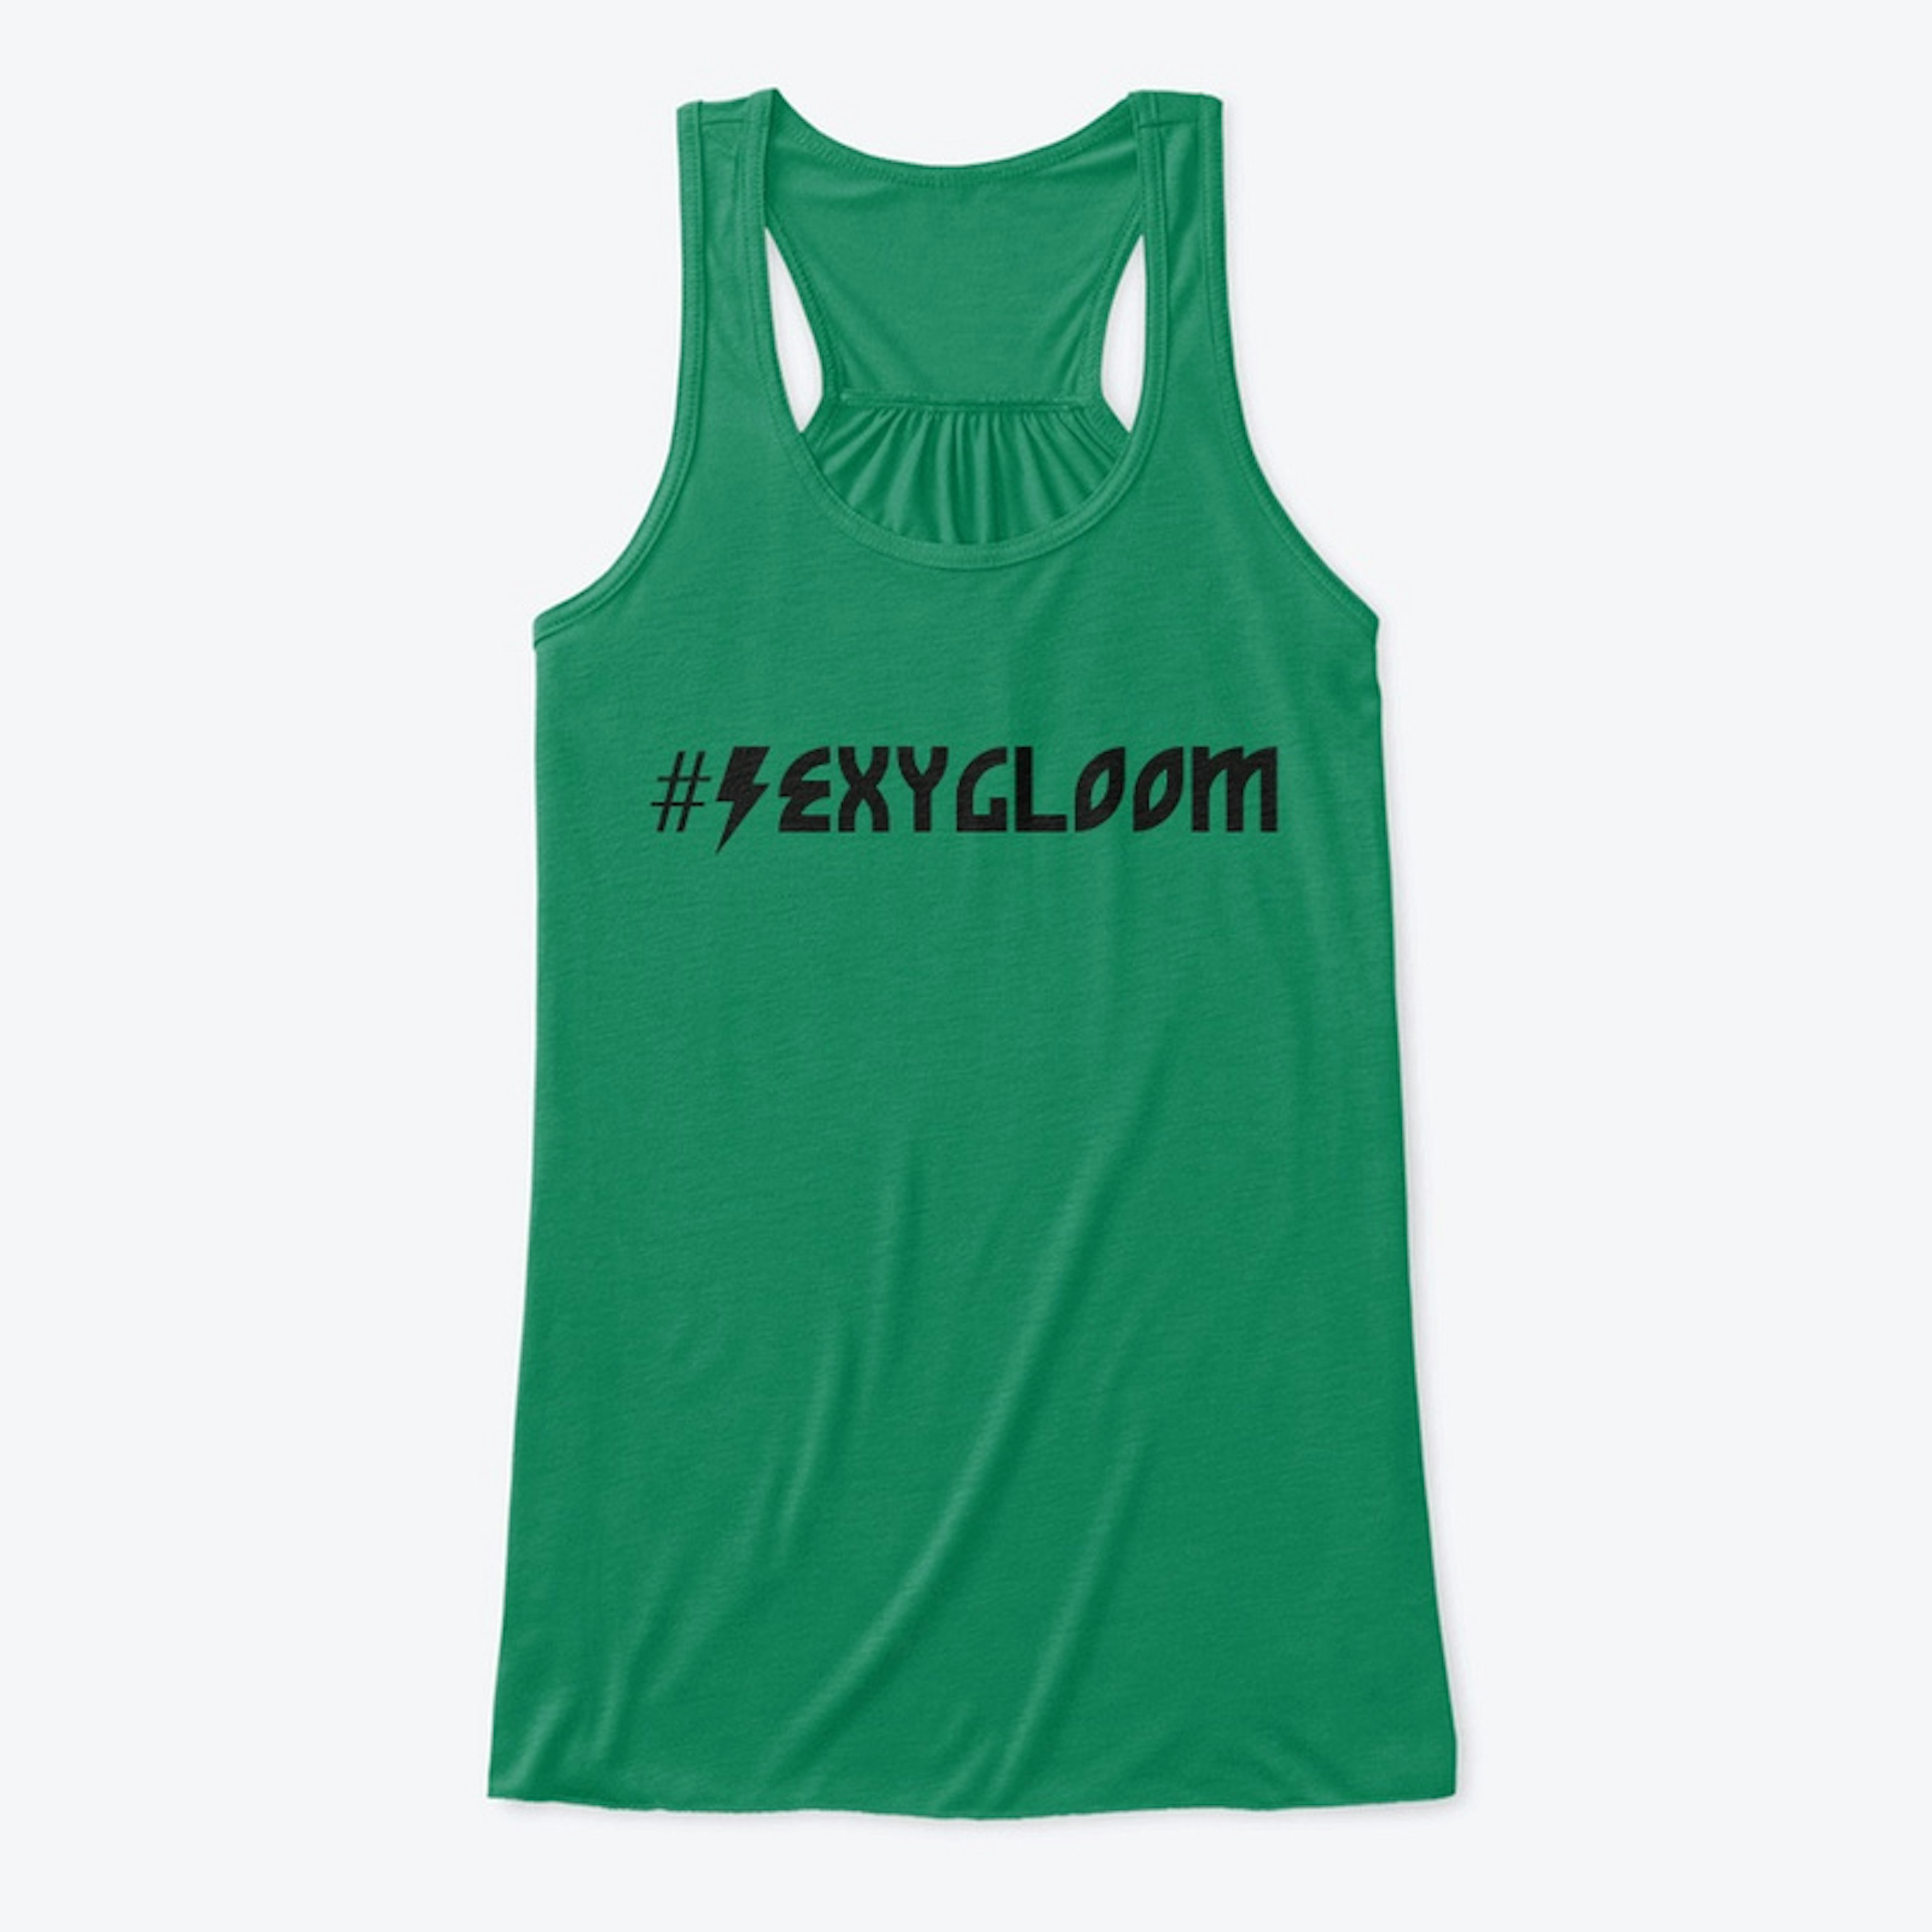 #SEXYGLOOM WOMENS TANK TOP